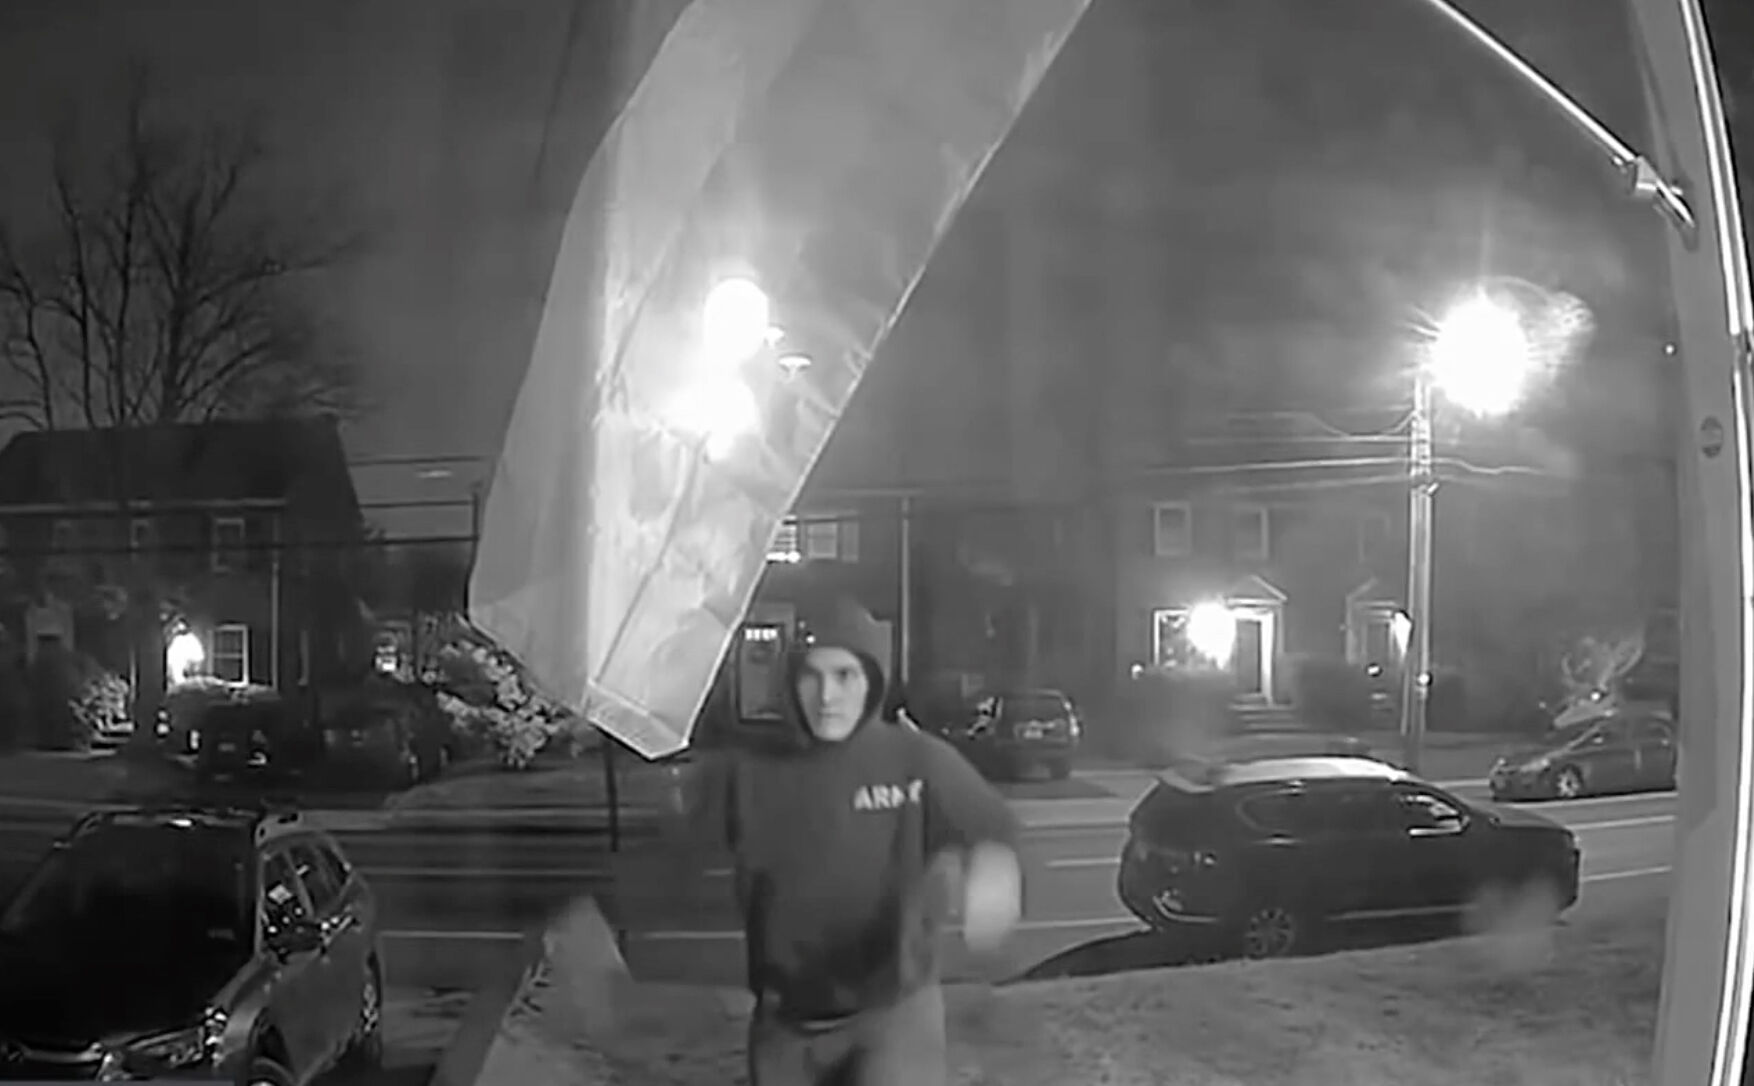 The home's Ring camera captured each of the thefts.